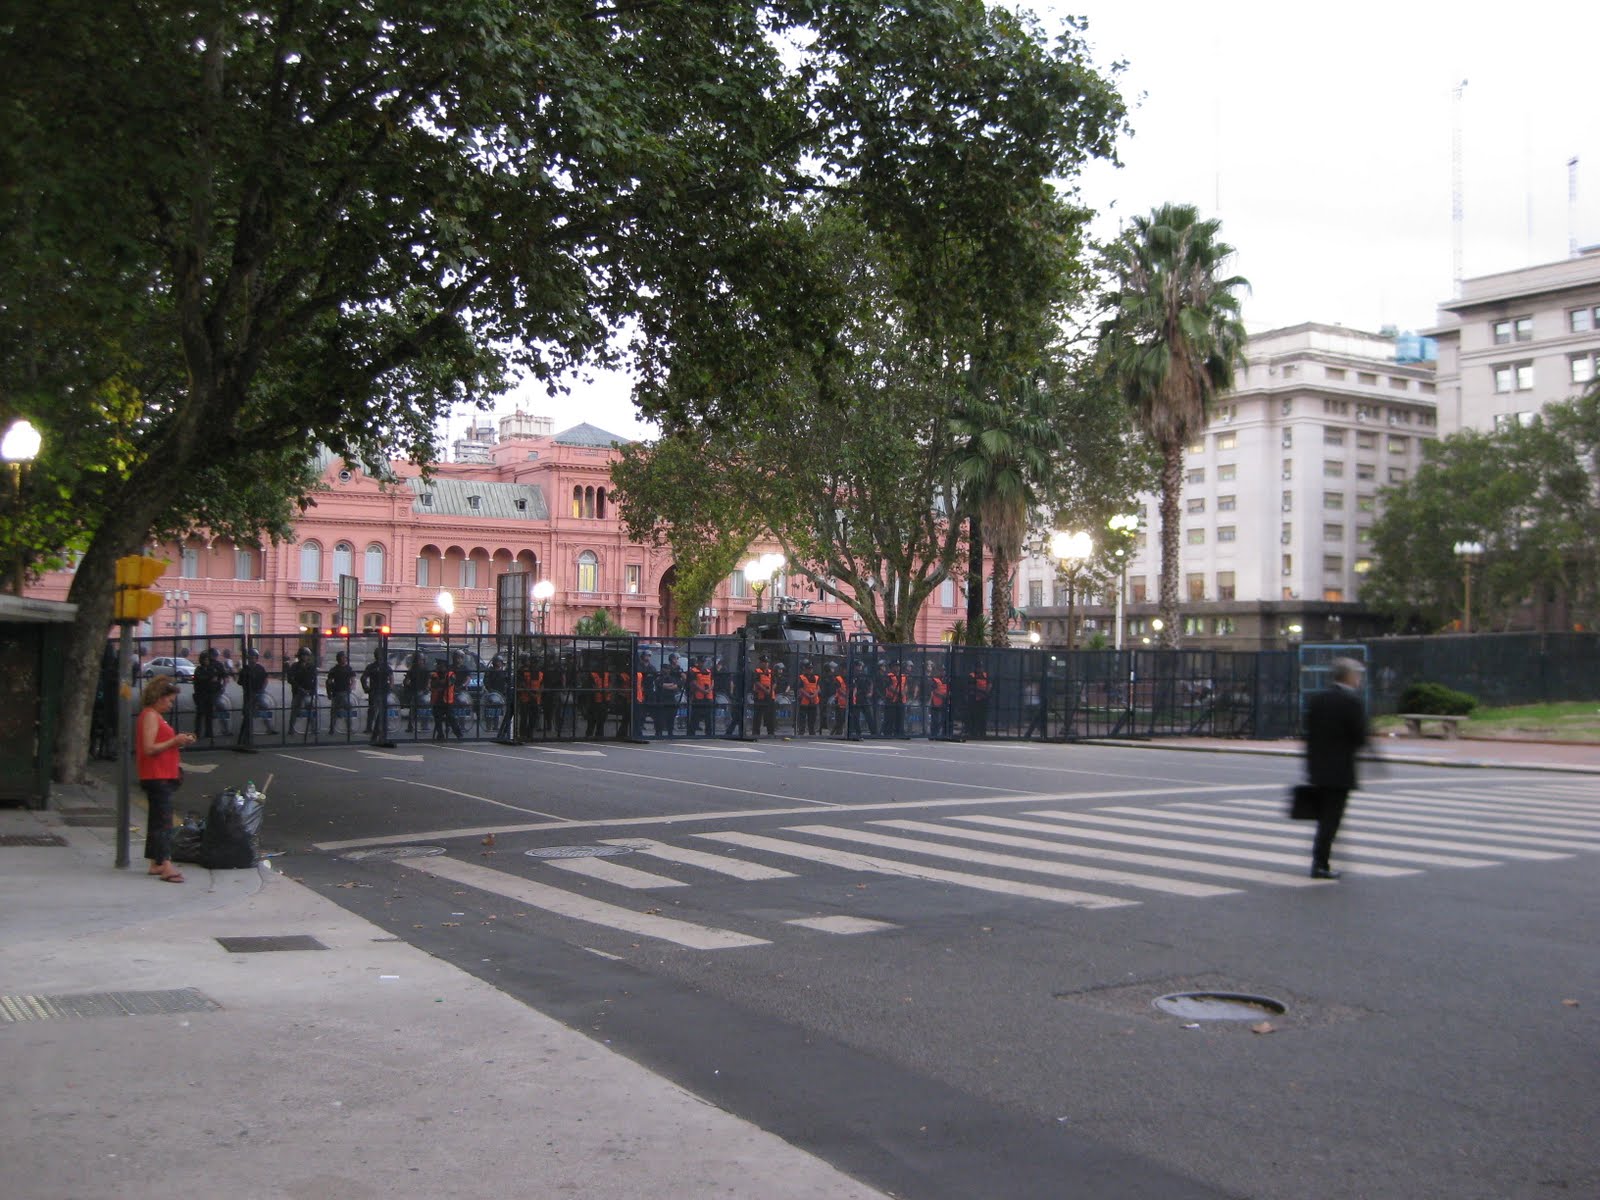 Barricades, ready for protesters (they were peaceful)